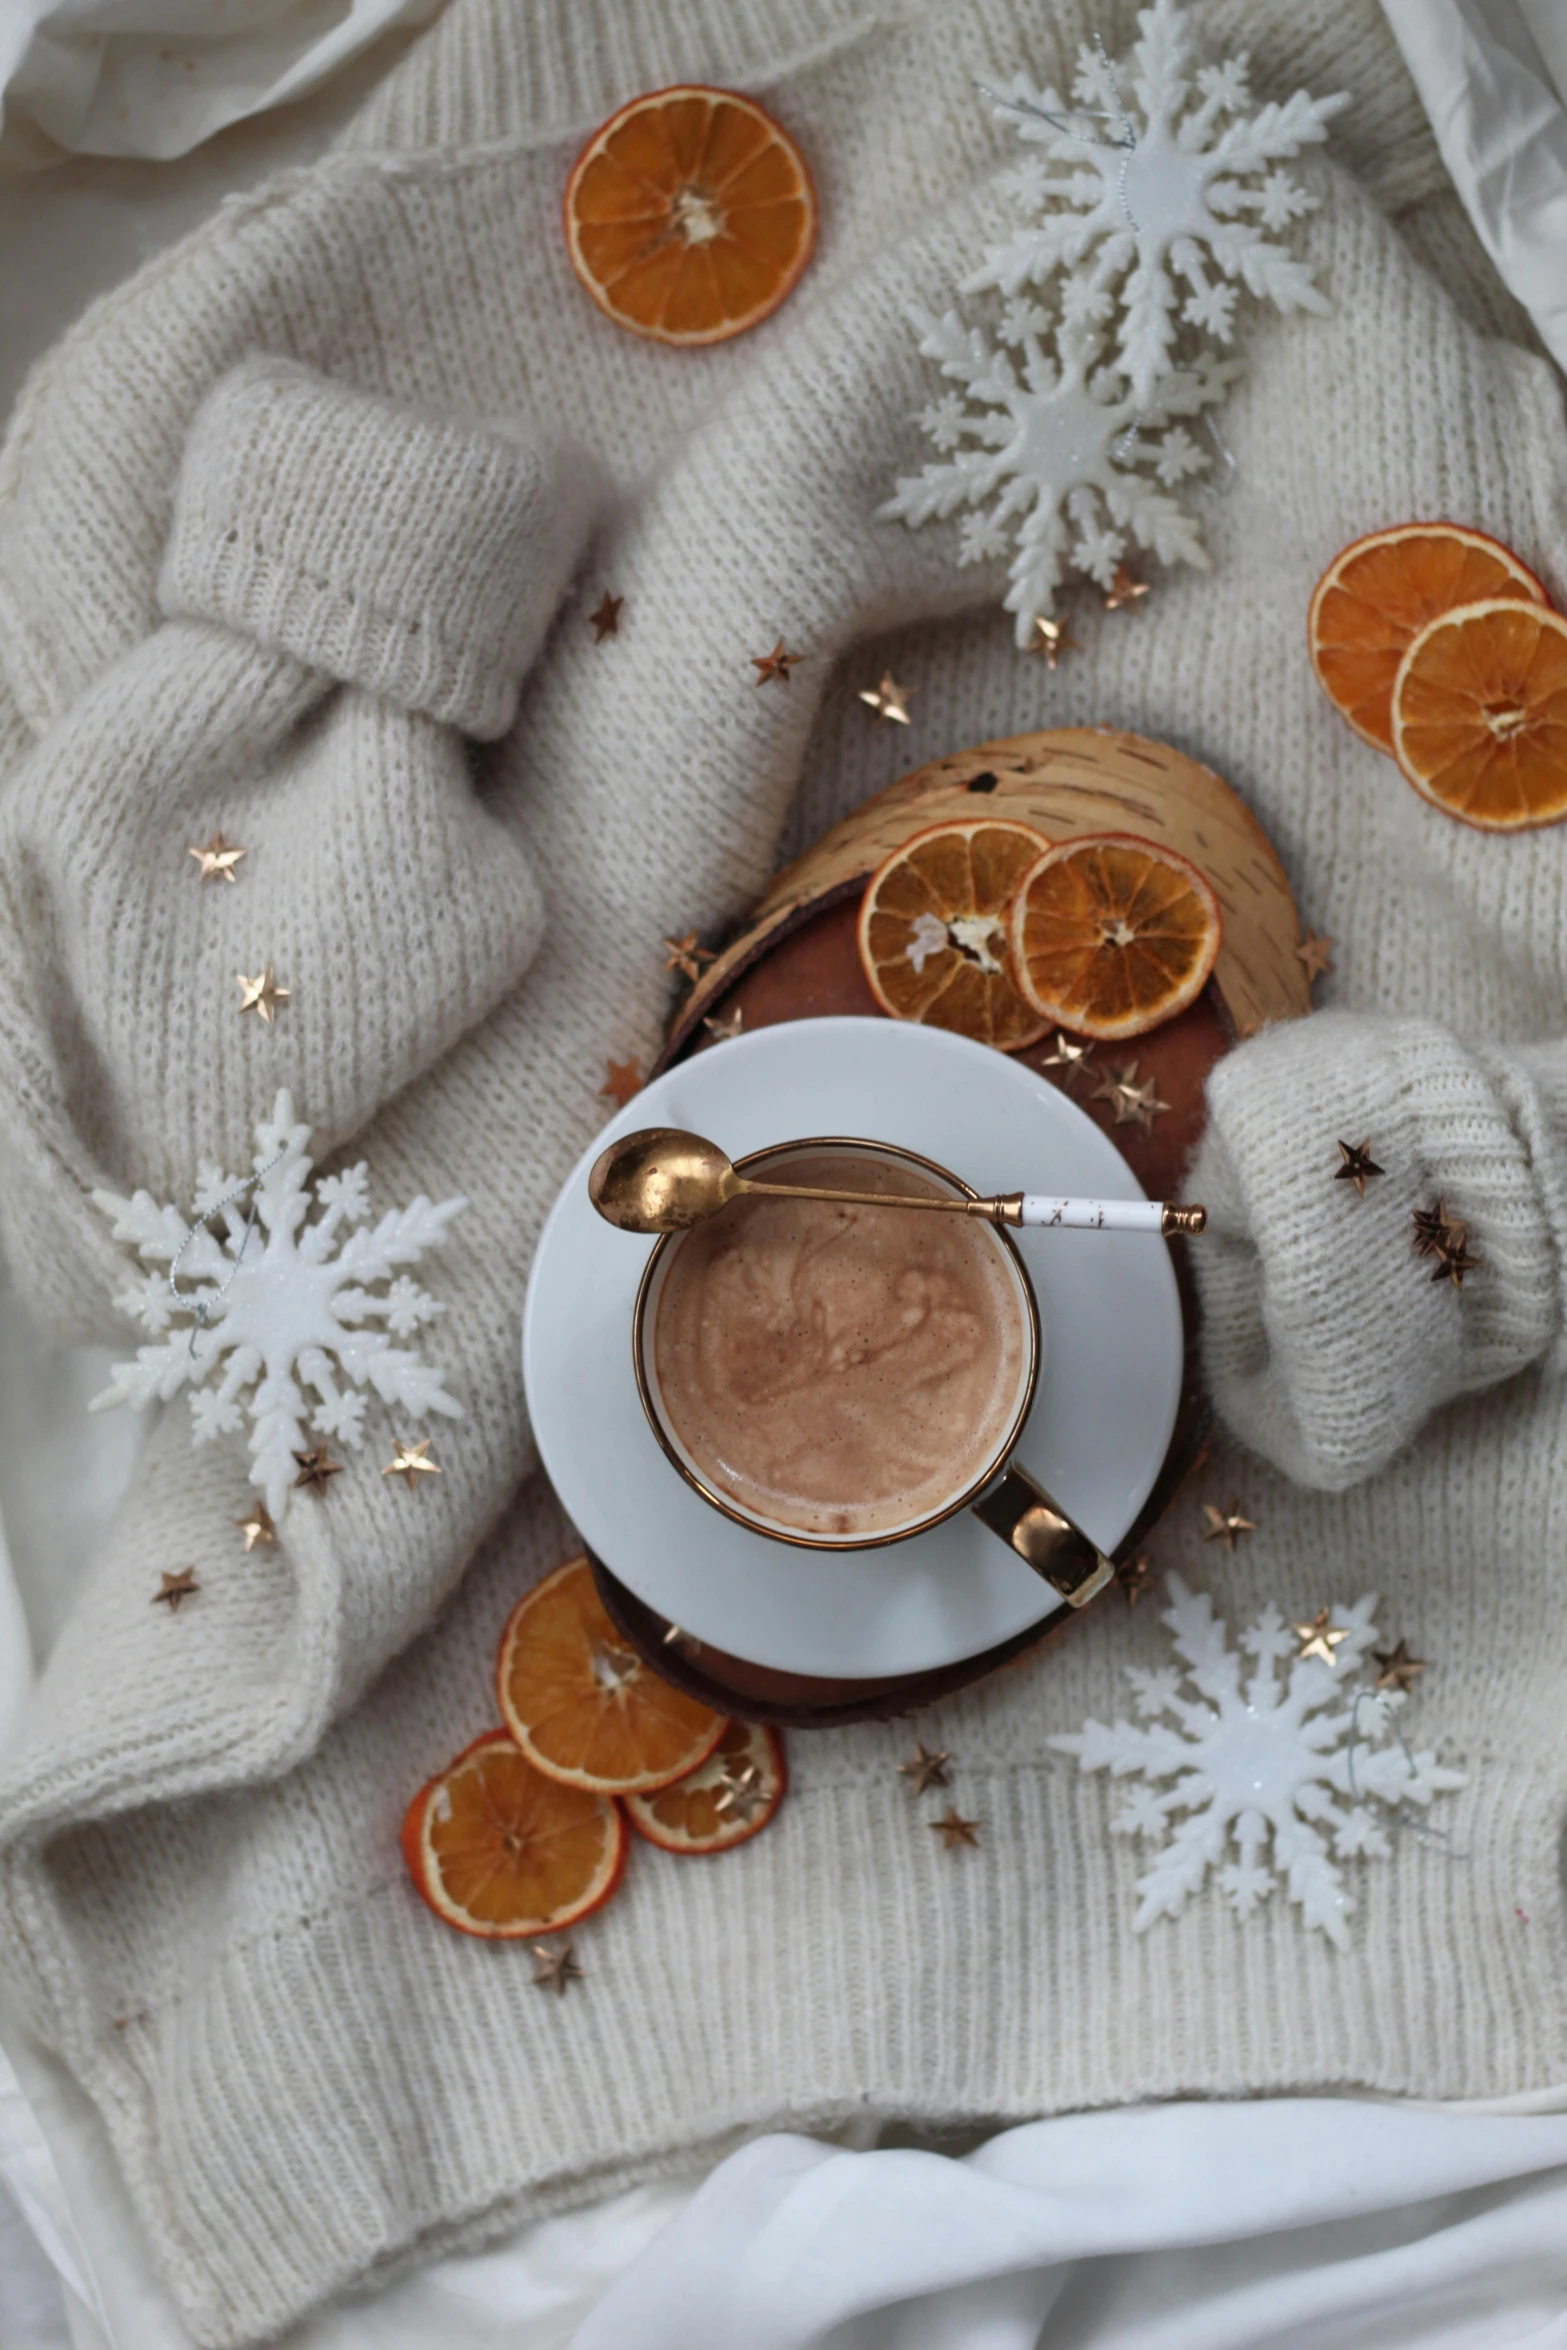 coffee and oranges are set on a blanket